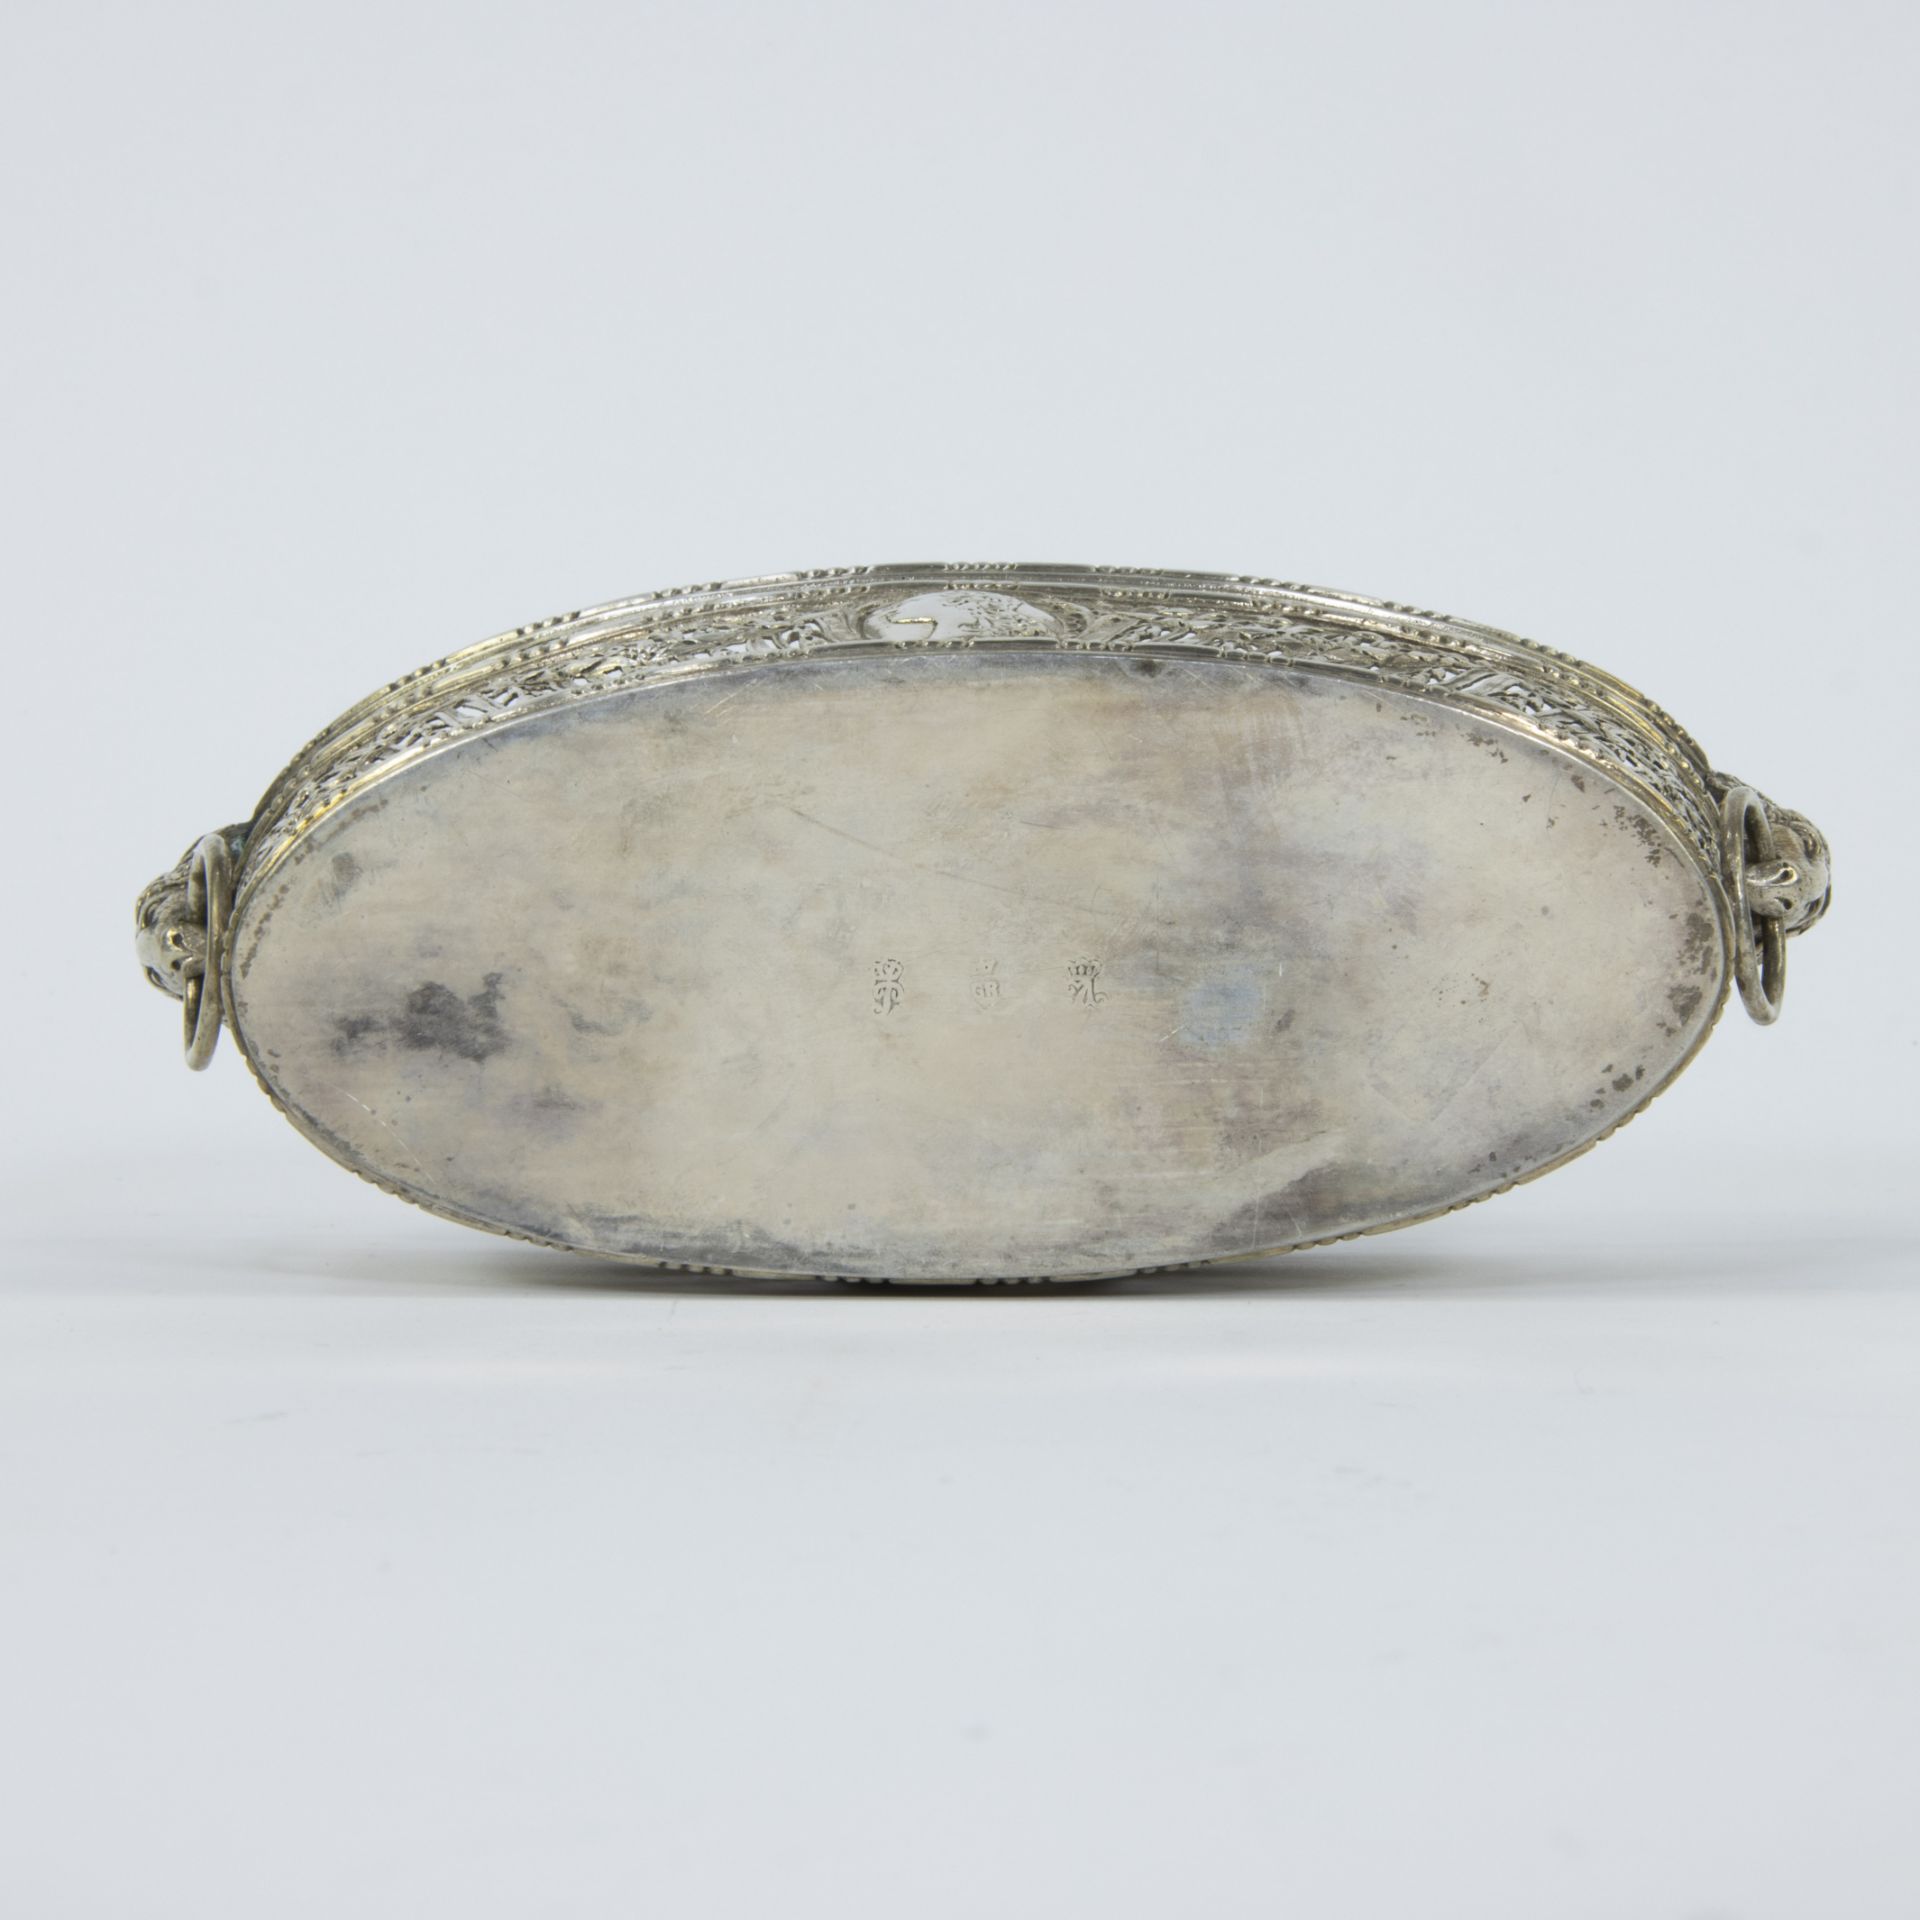 A French oval silver basket in Louis XVI style decorated with garlands, medallion and ram's heads - Image 4 of 6